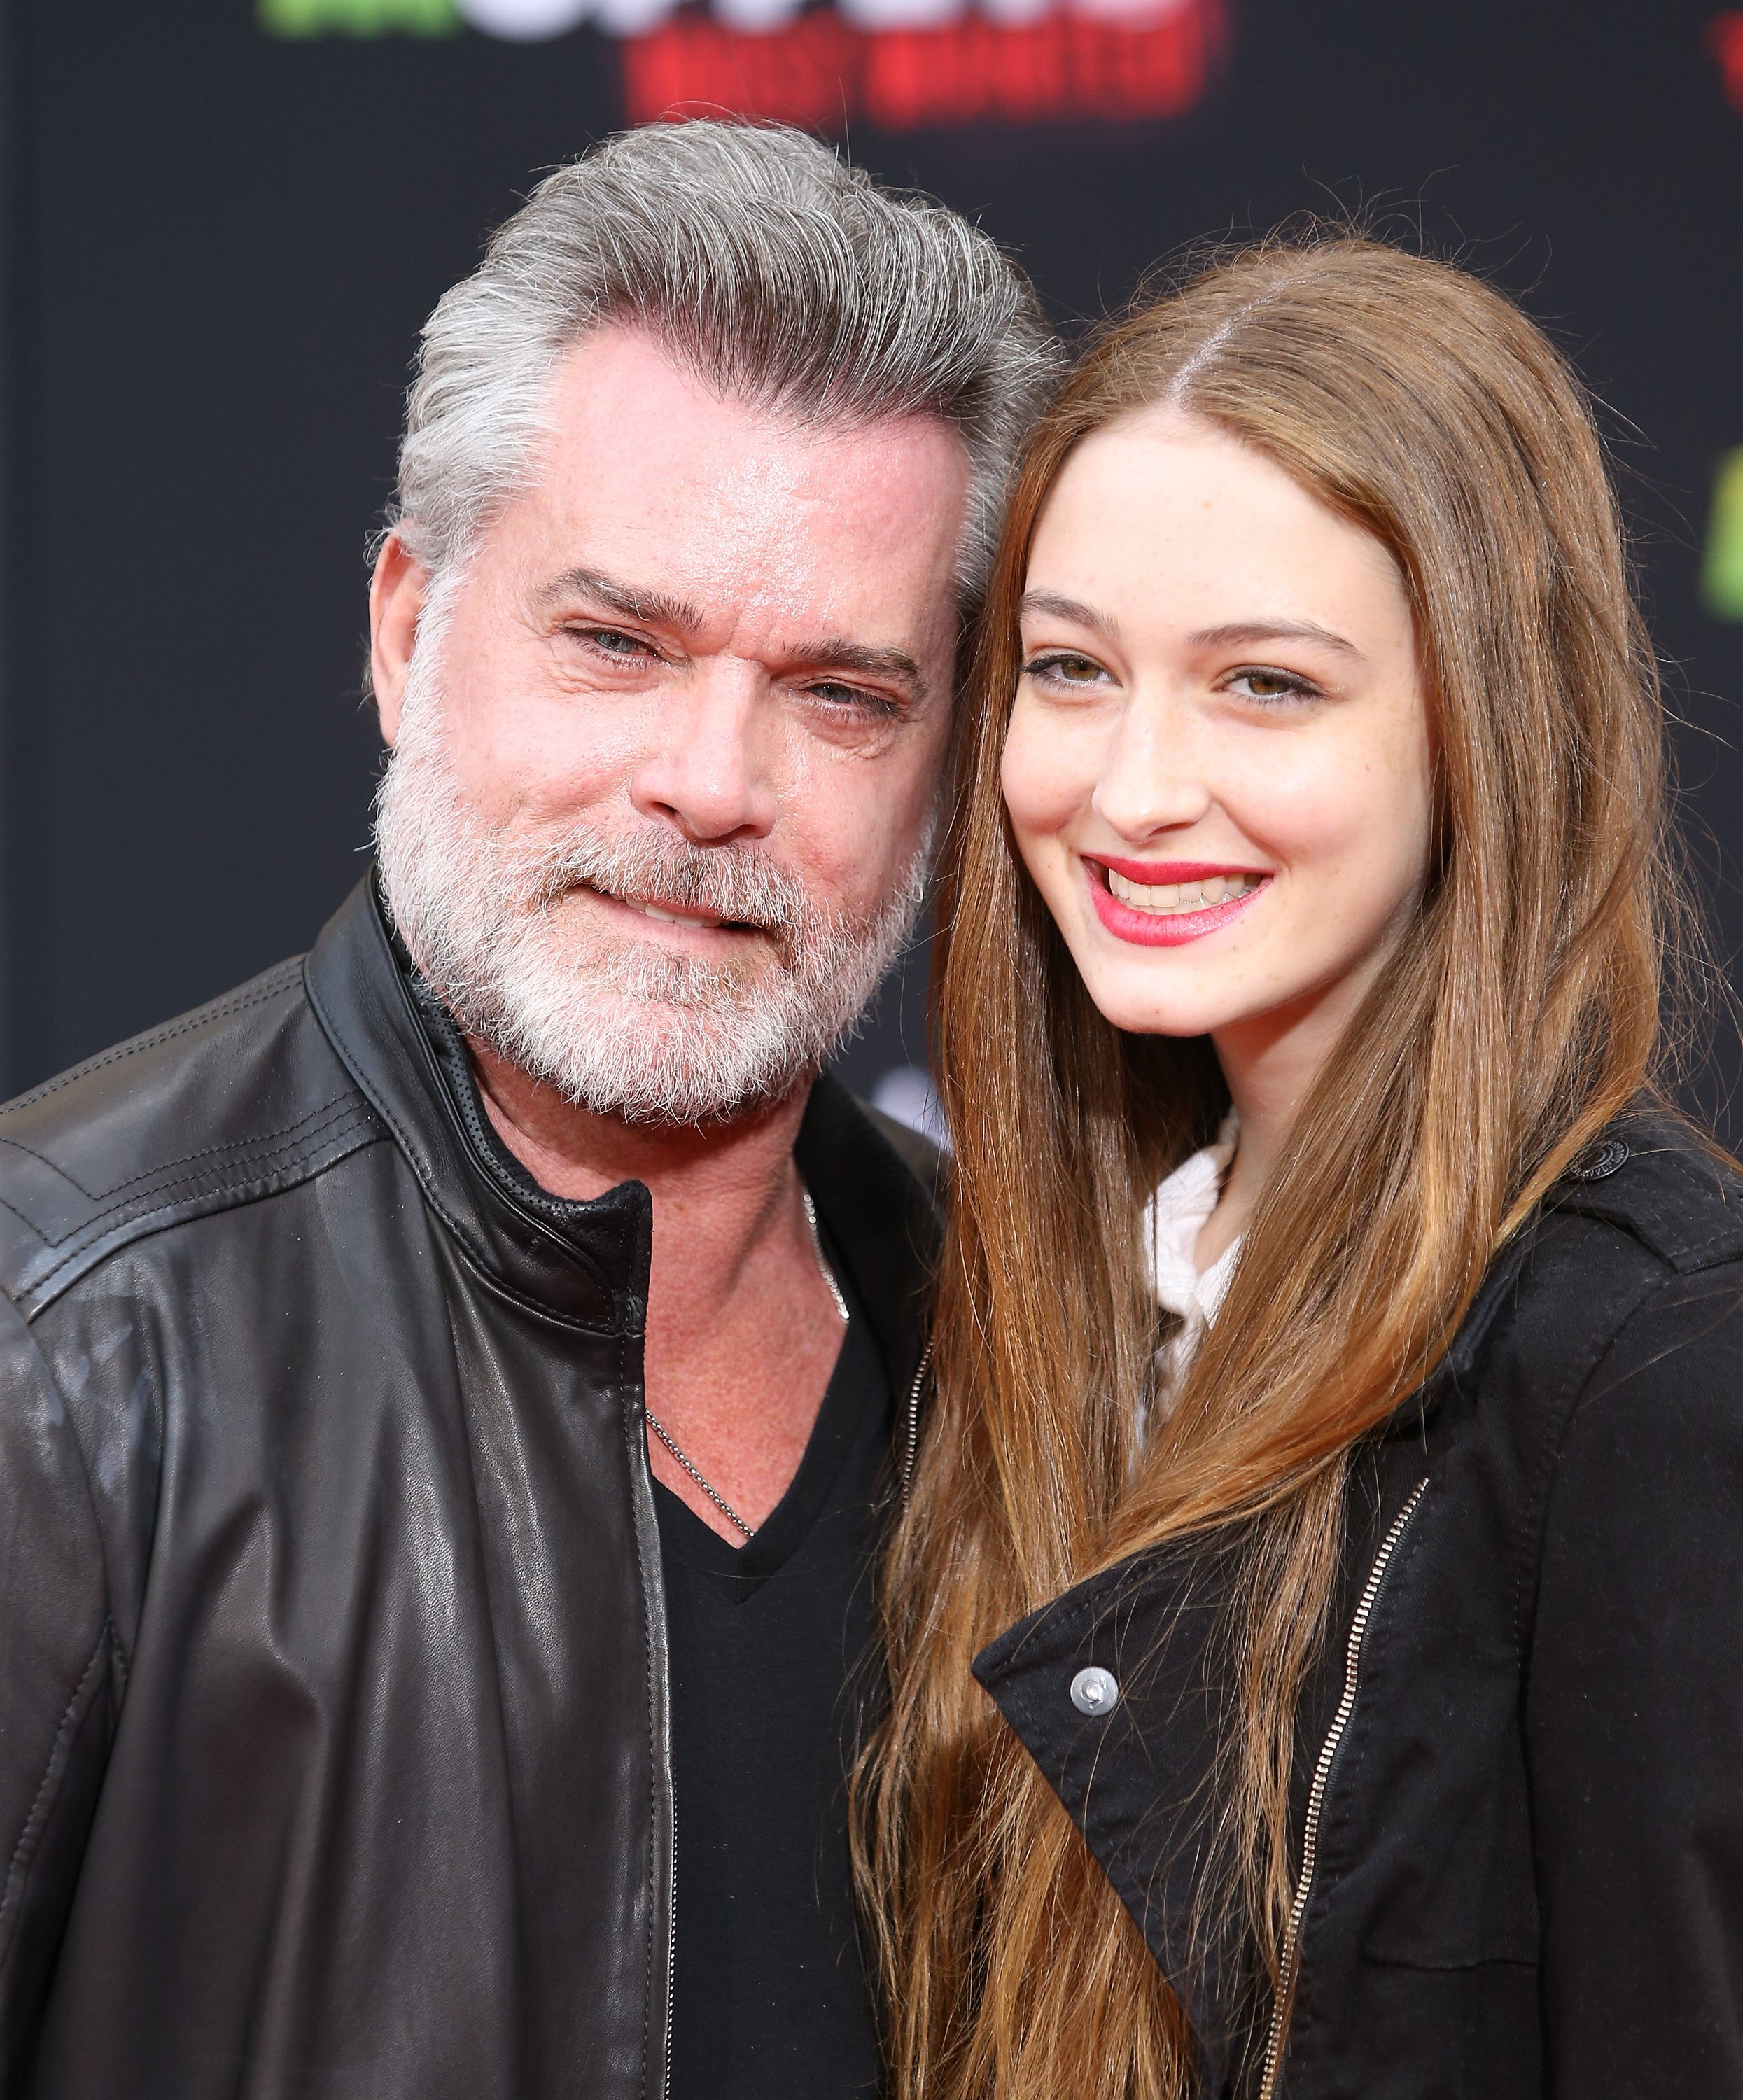 Ray and Karsen Liotta at the Los Angeles premiere of "Muppets Most Wanted" on March 11, 2014, in Hollywood, California. | Source: Michael Tran/FilmMagic/Getty Images